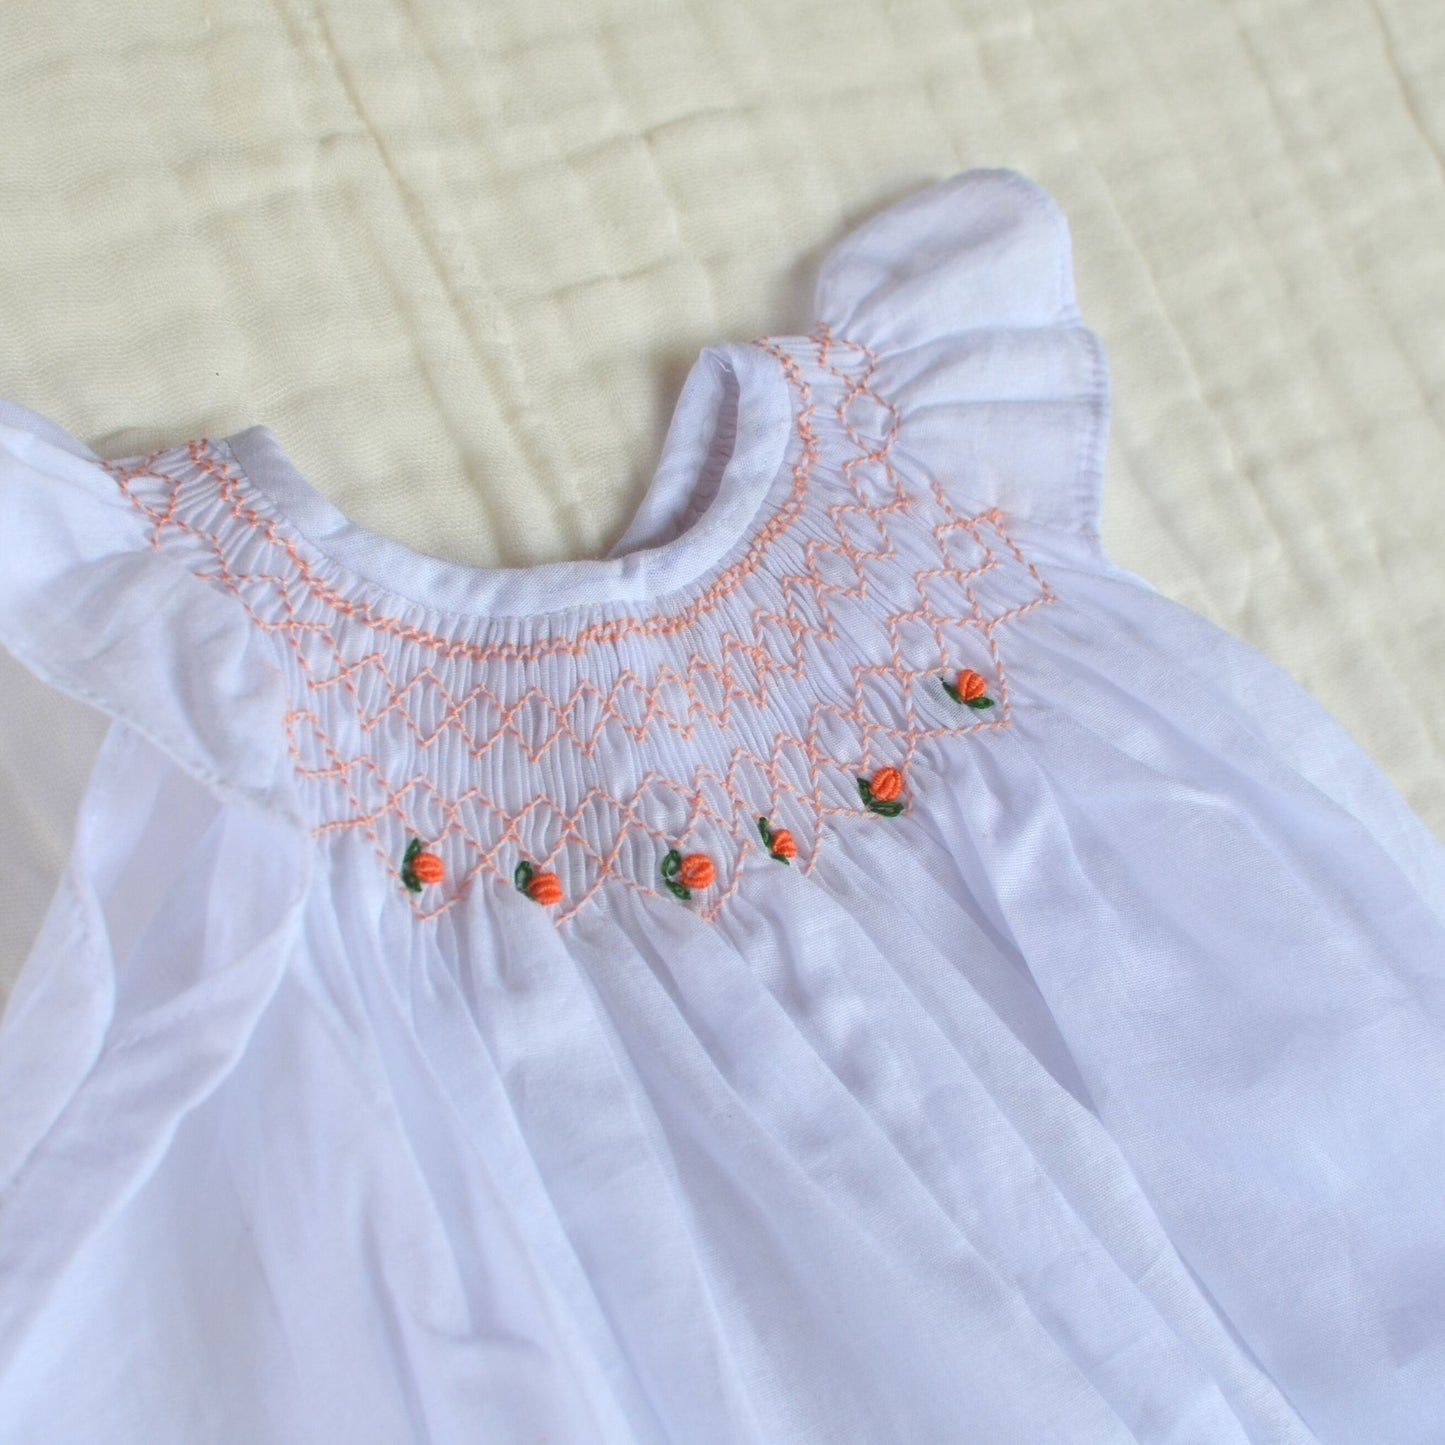 Handmade Smocked Dress Collection - 3 to 6 months